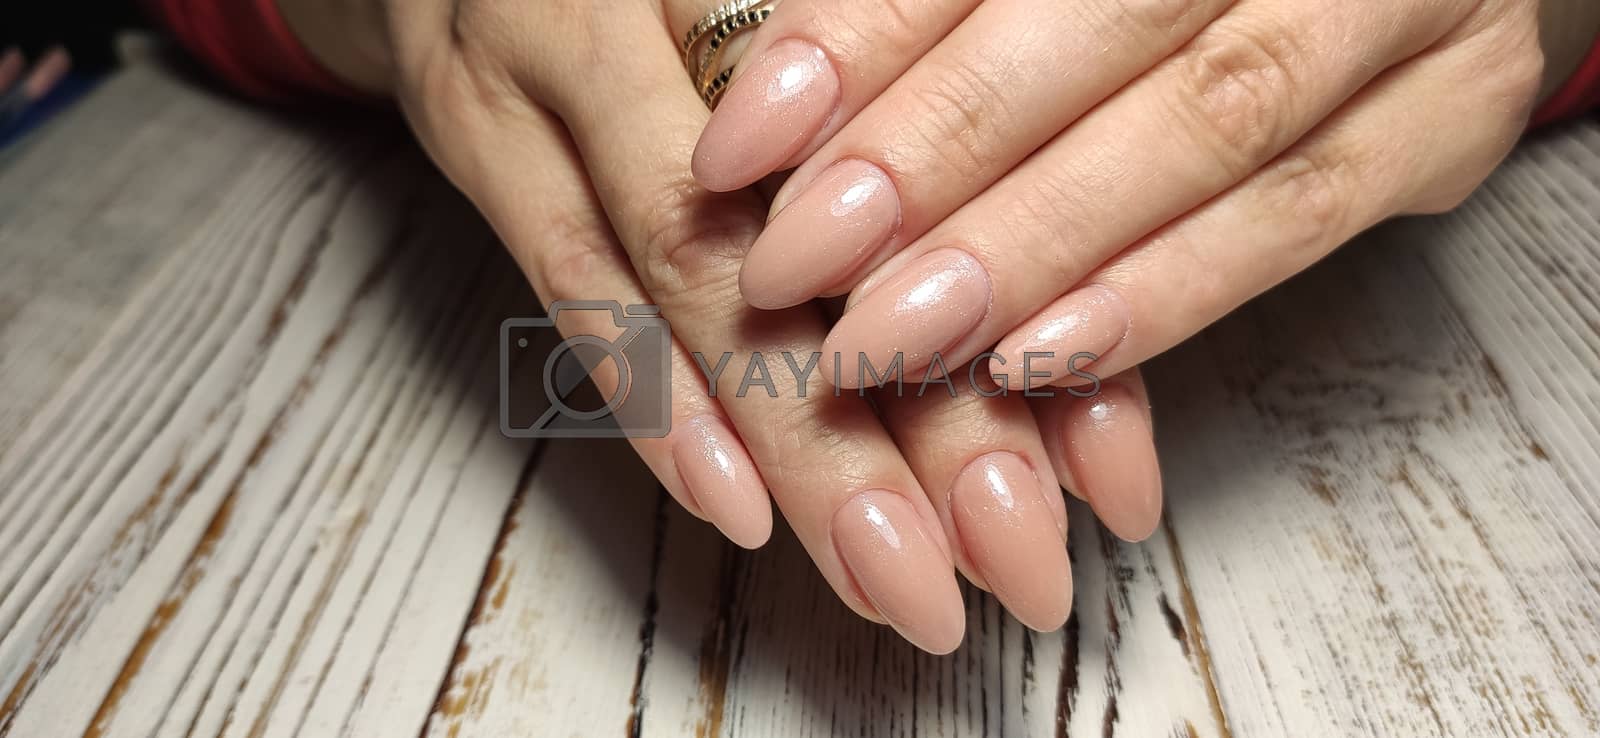 Royalty free image of Hands Care. Design Hand With Pastel Nails by SmirMaxStock